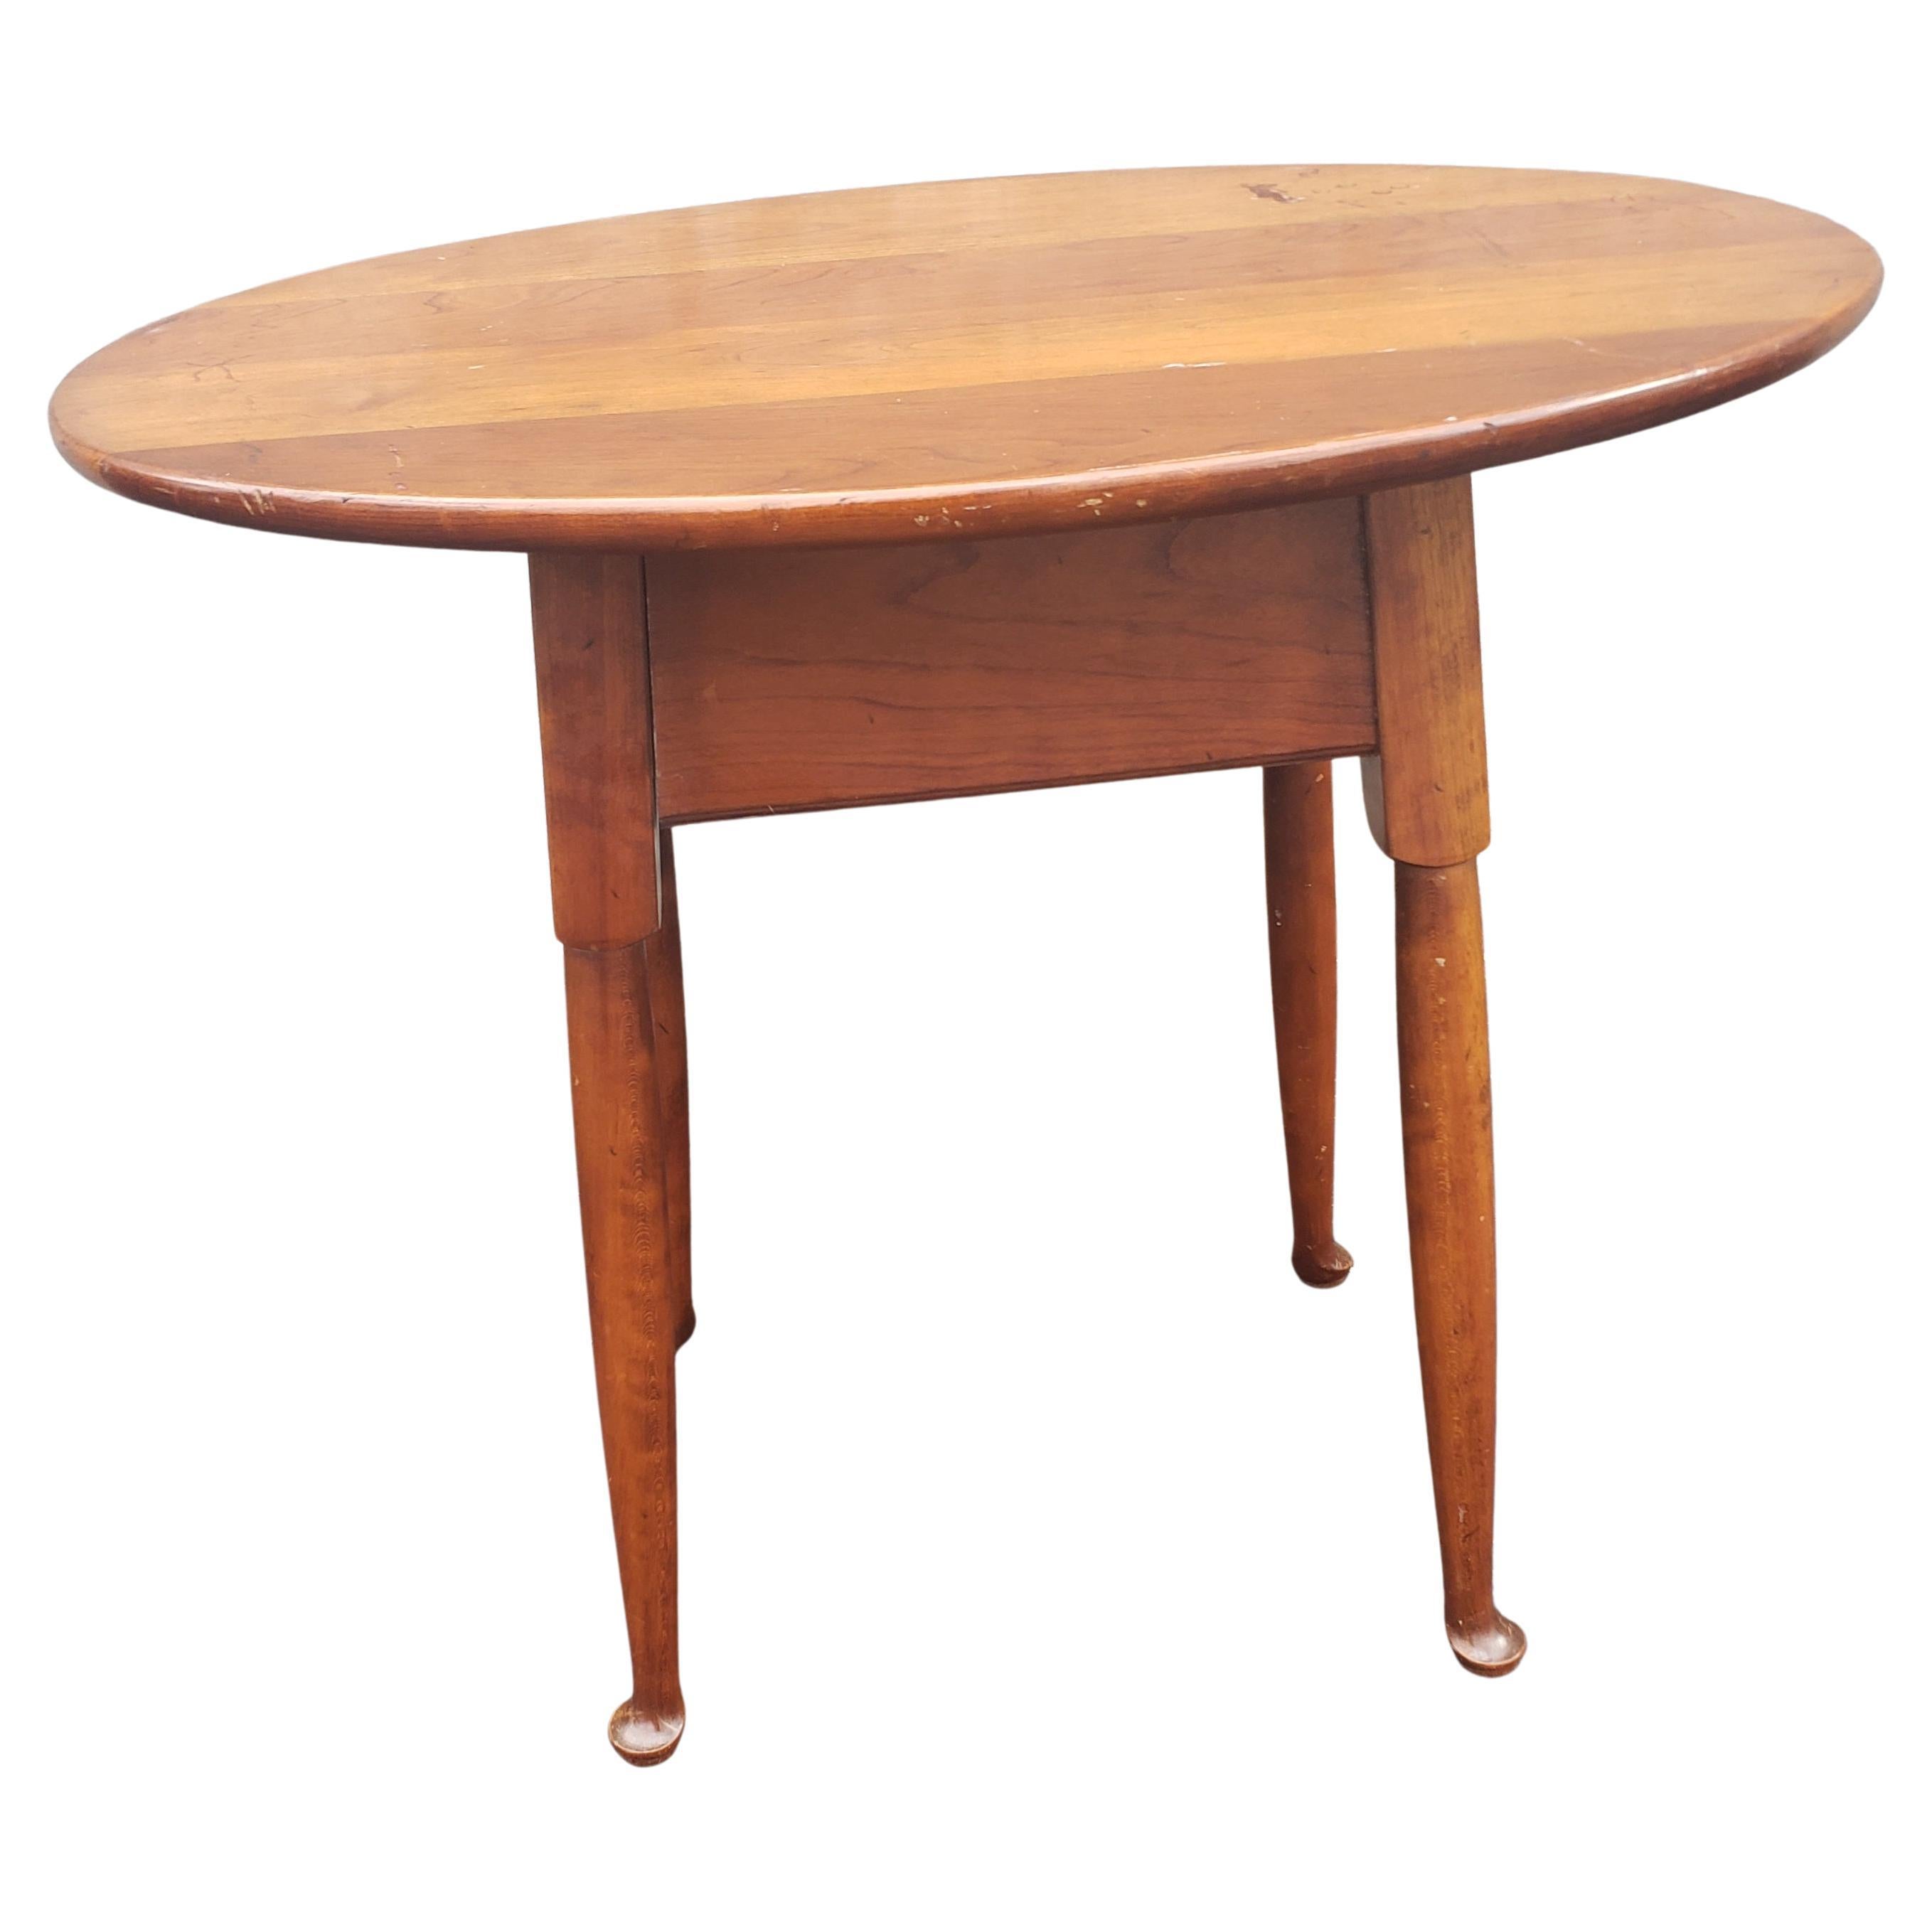 A midcentury Stickley single drawer Cherry oval side table measuring 25.5